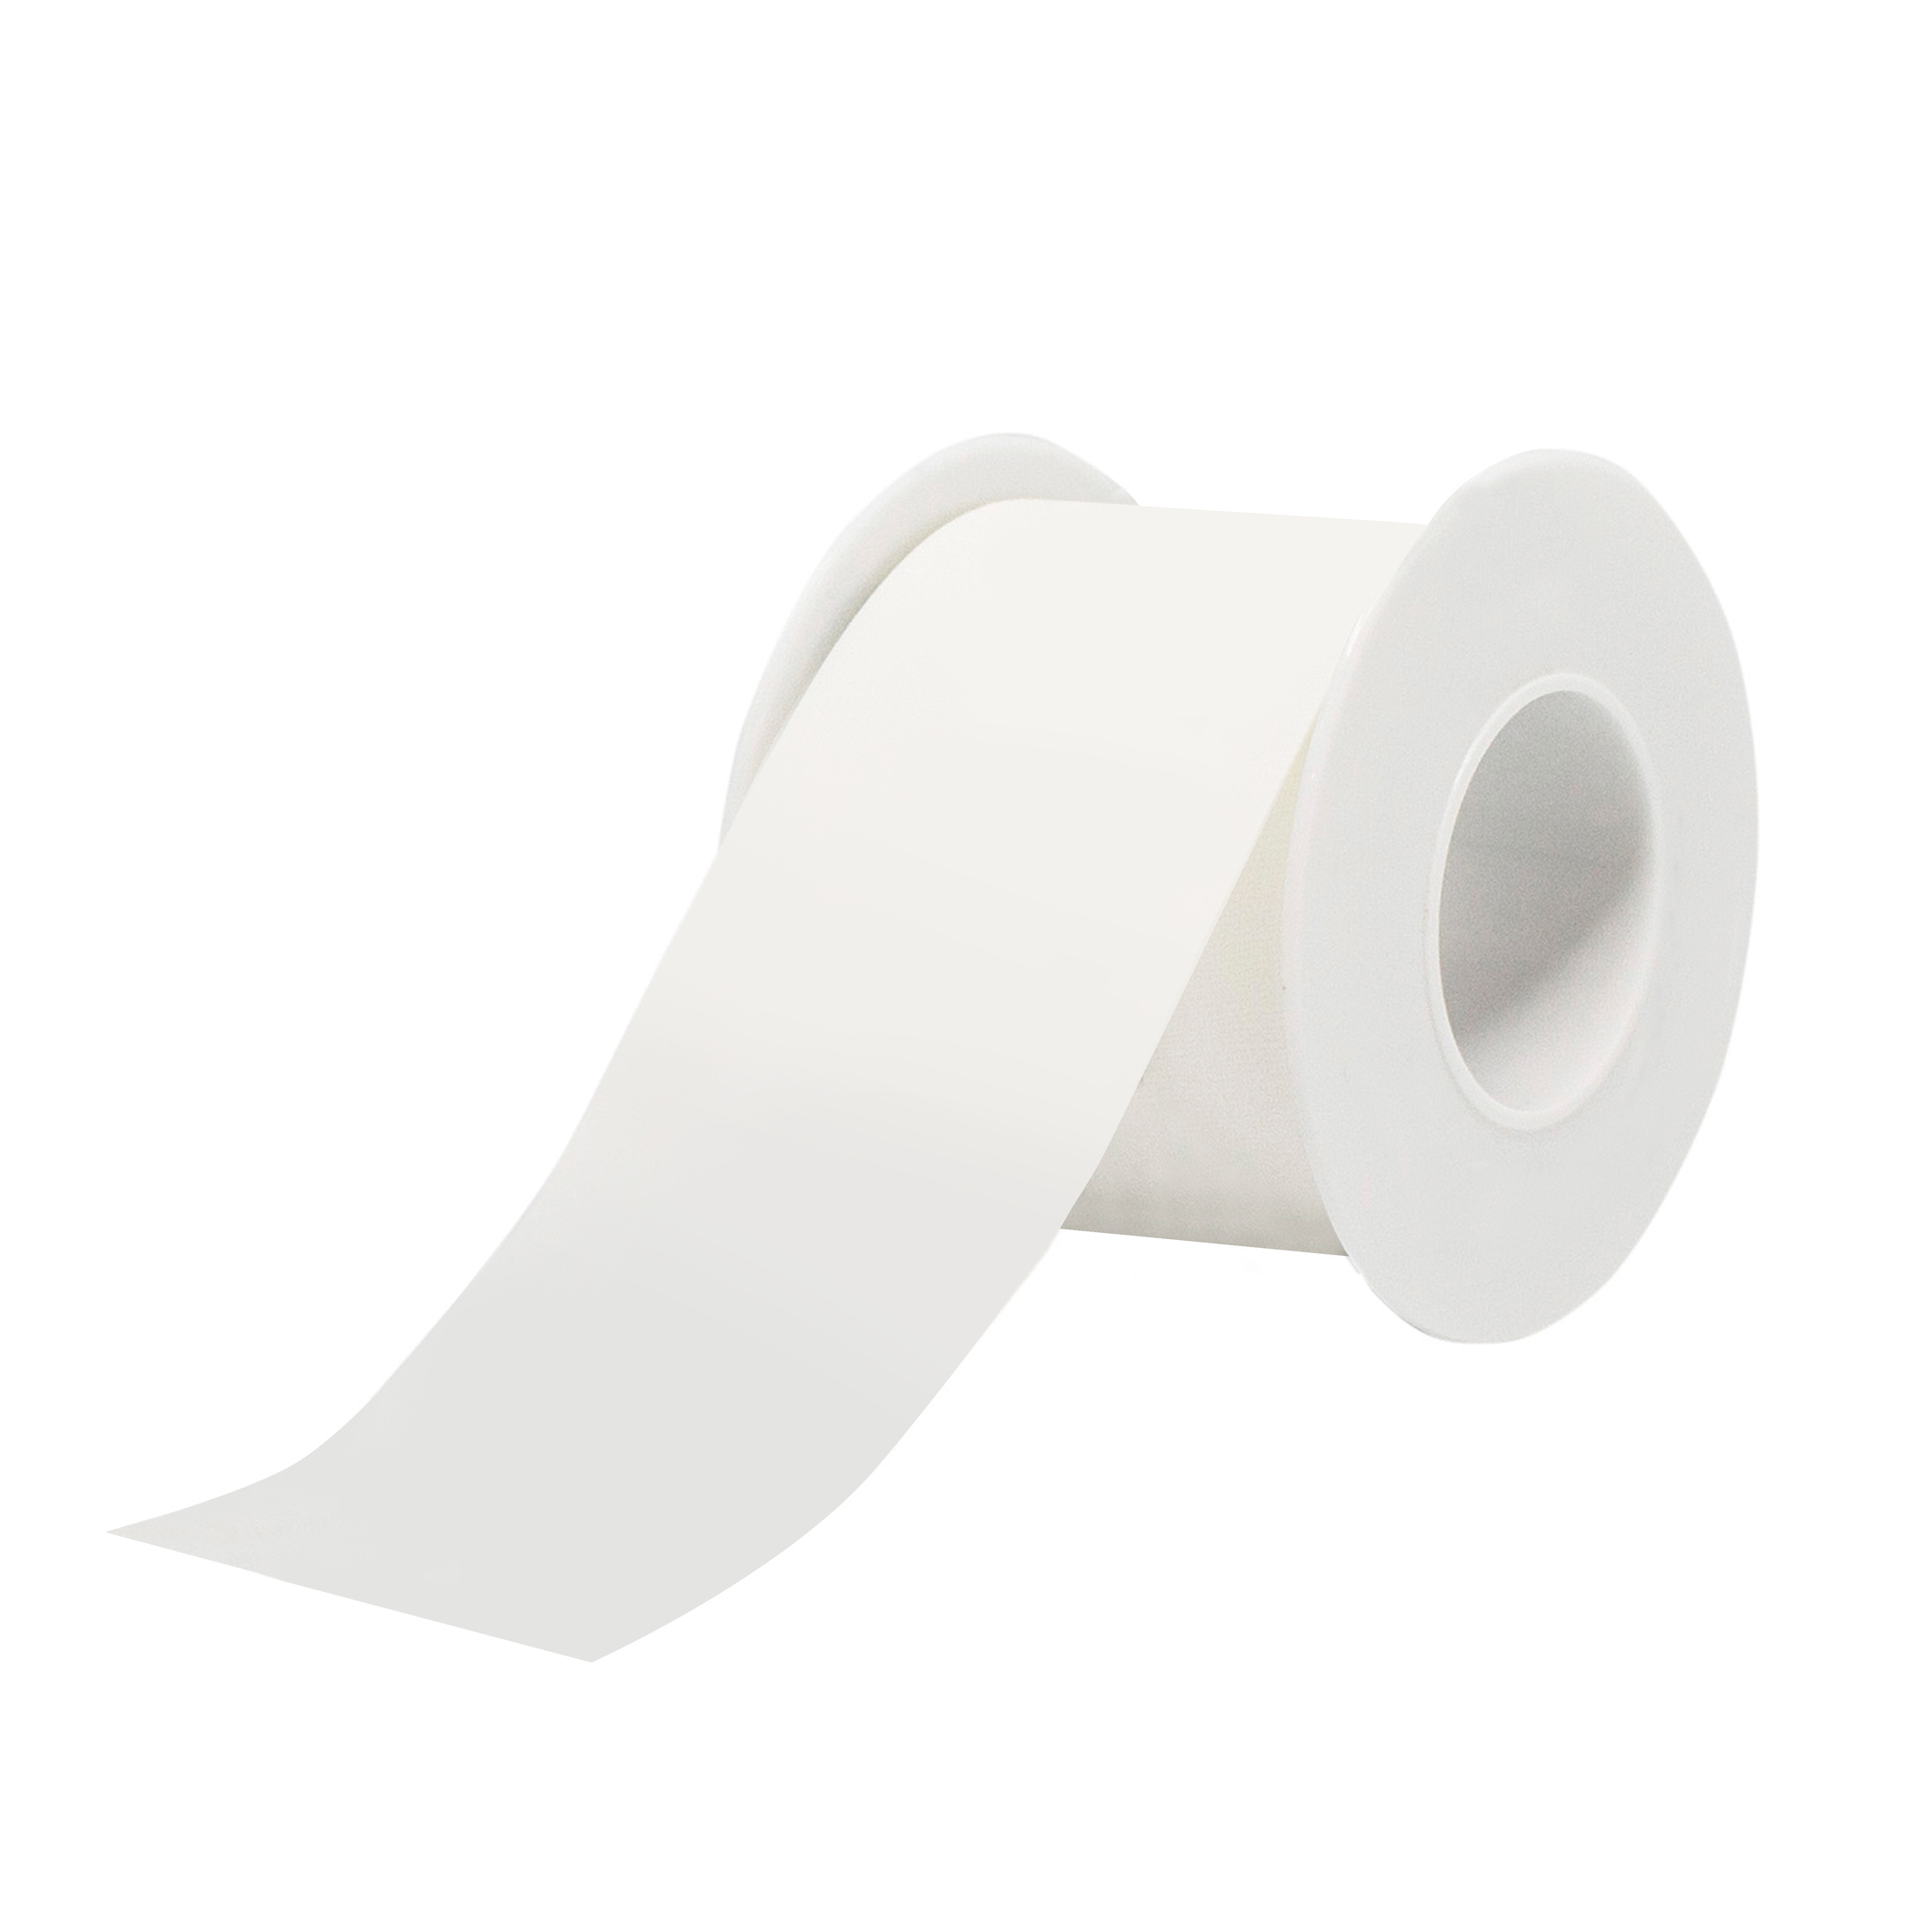 Waterproof Tape Products, Supplies and Equipment